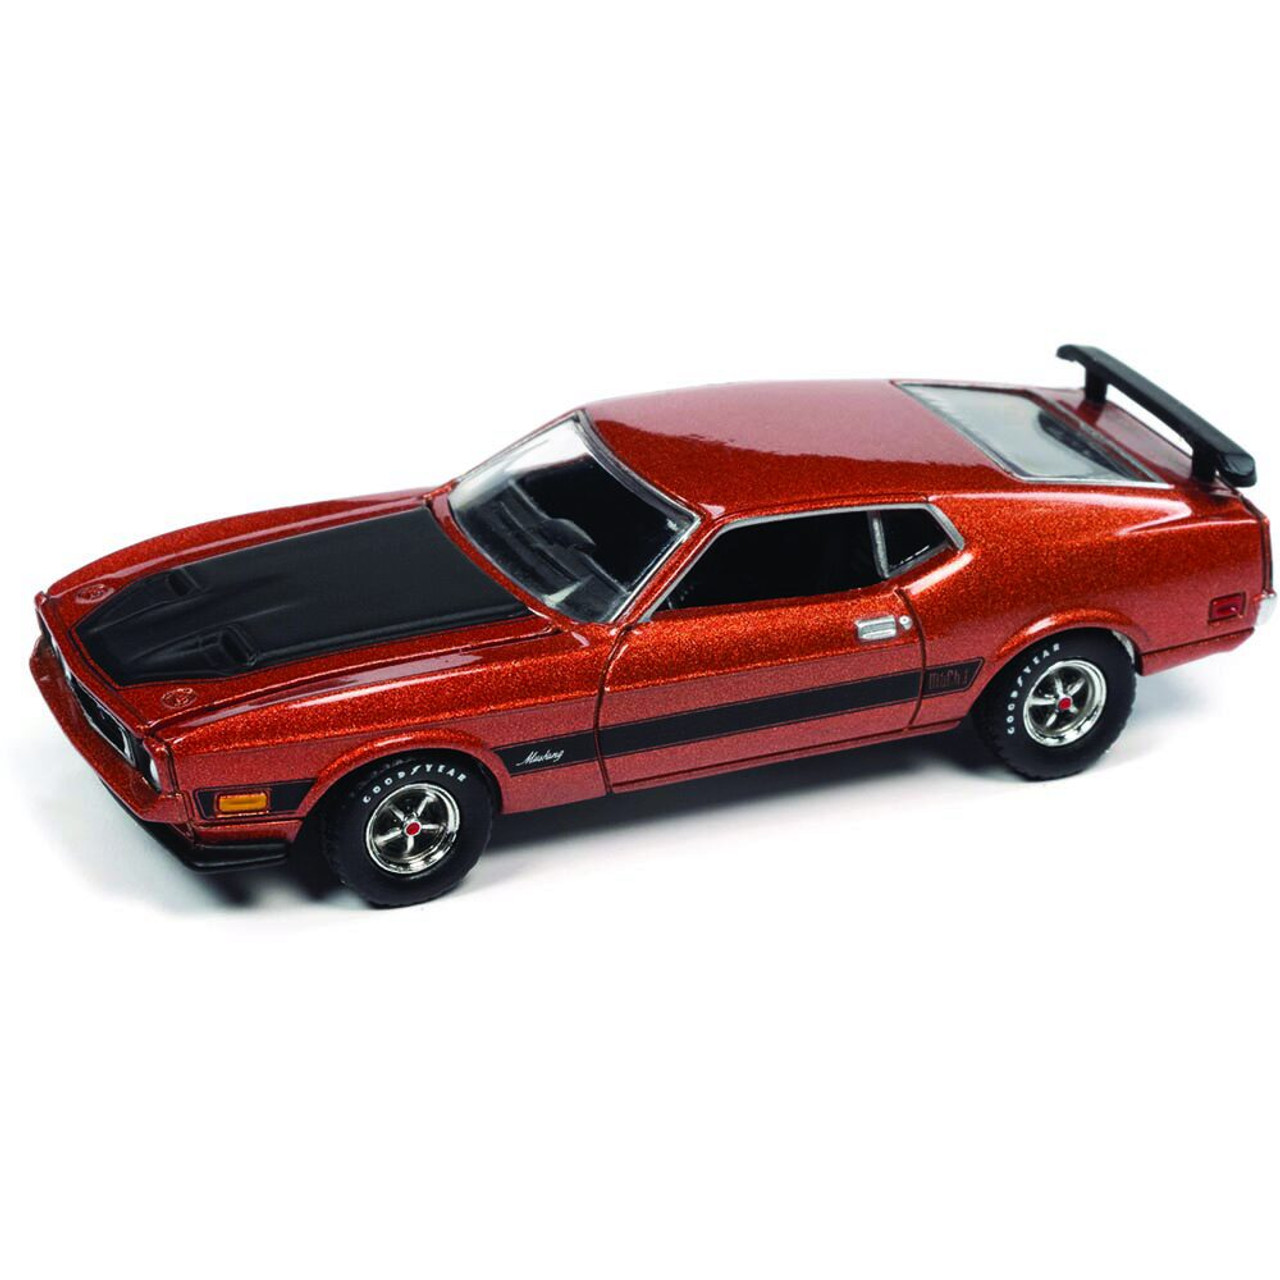 1973 Ford Mustang Mach 1 - Copper 1:64 Scale | Collectable Diecast